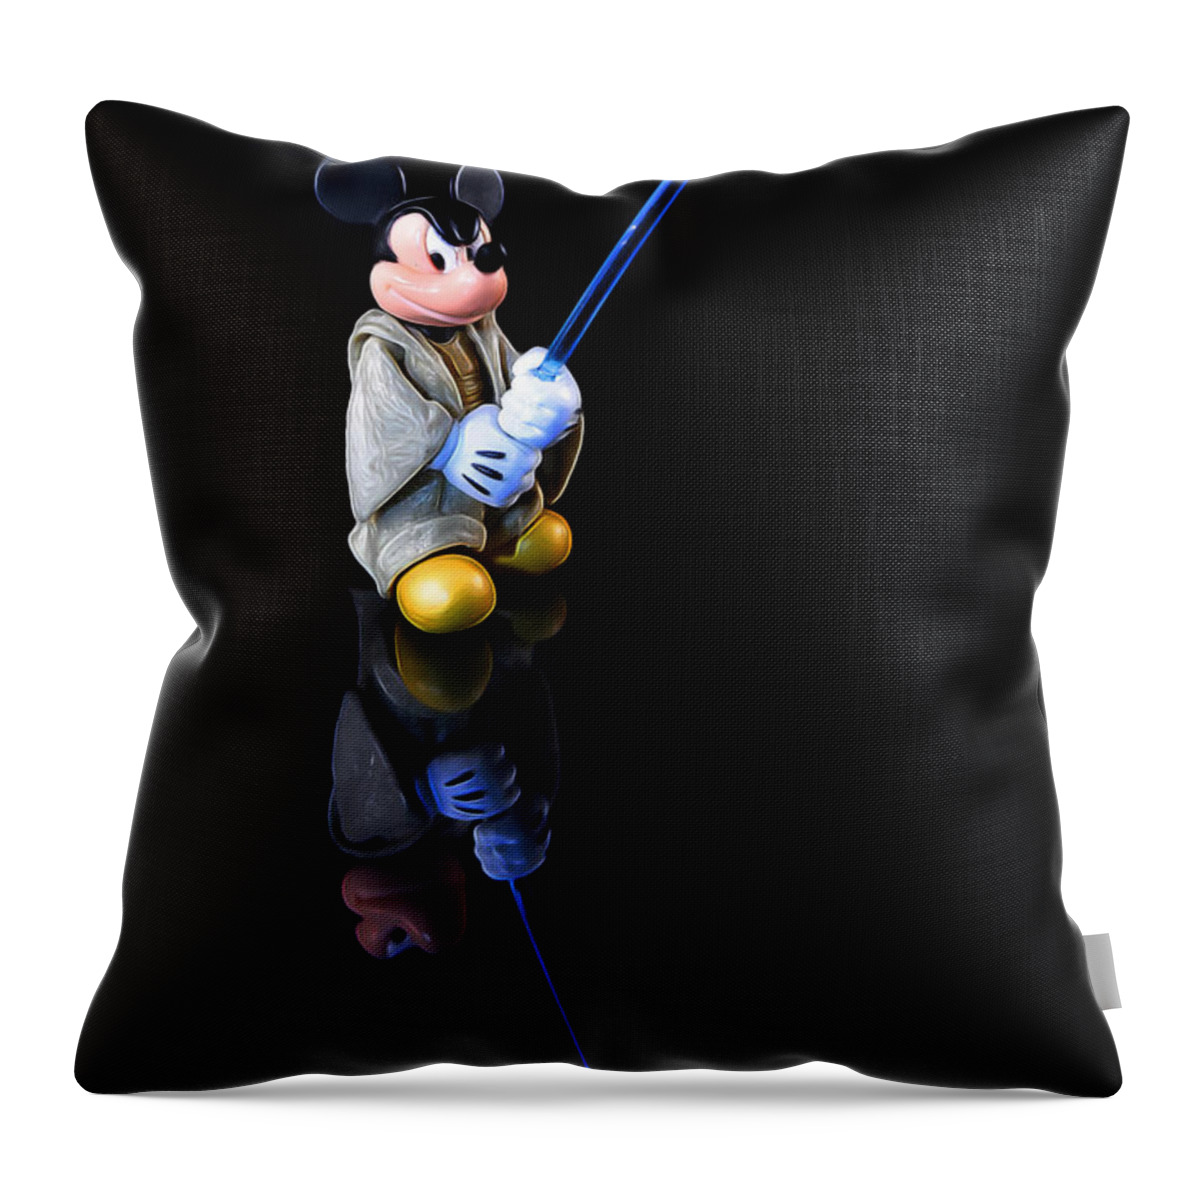 Toy Throw Pillow featuring the photograph Star Wars Mickey Mouse by Bill and Linda Tiepelman